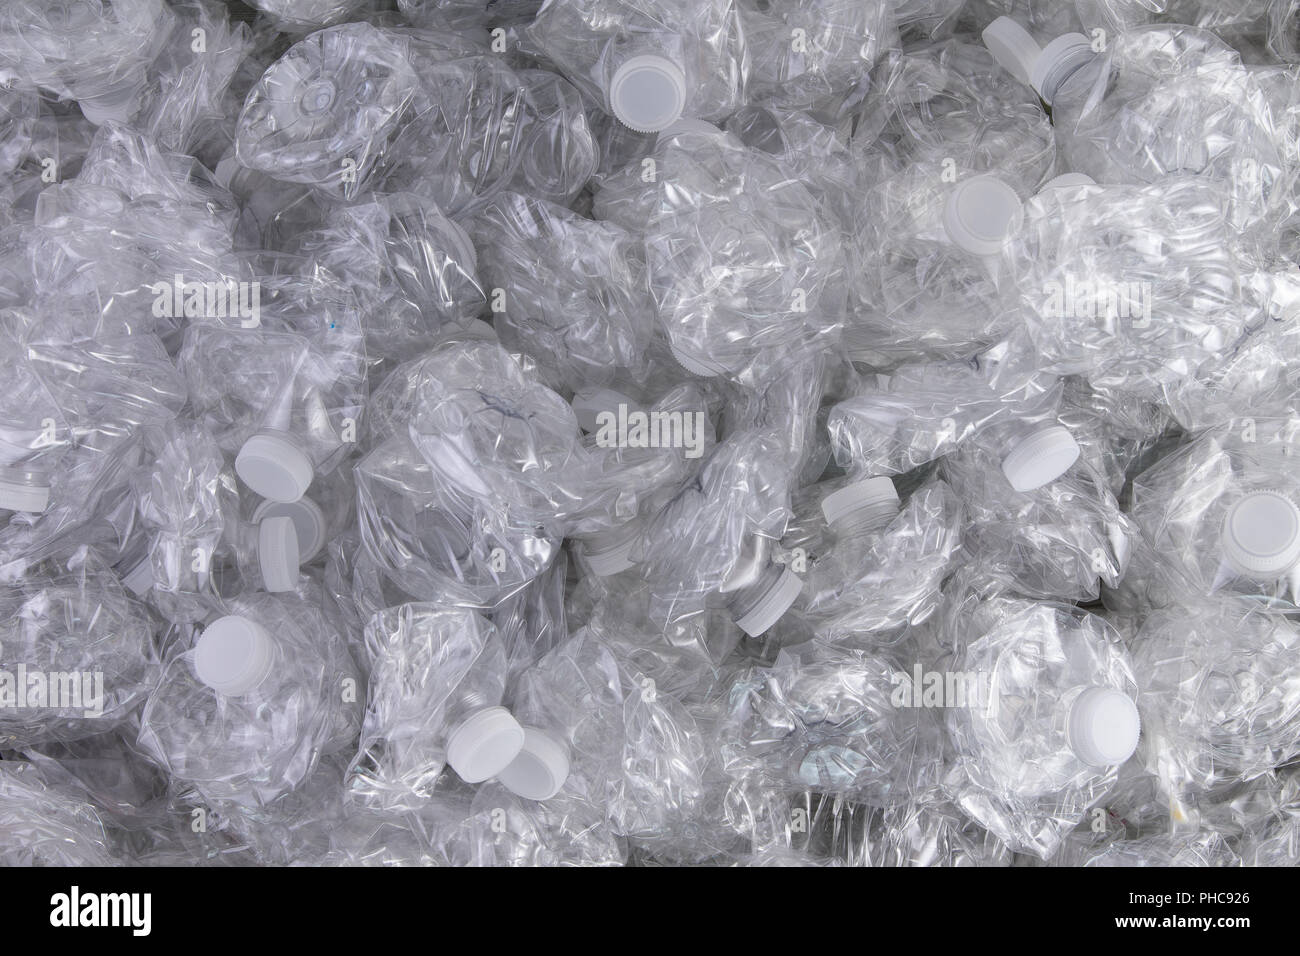 Background texture of crumpled crushed clear plastic bottles piled in a heap ready for recycling to save the environment Stock Photo